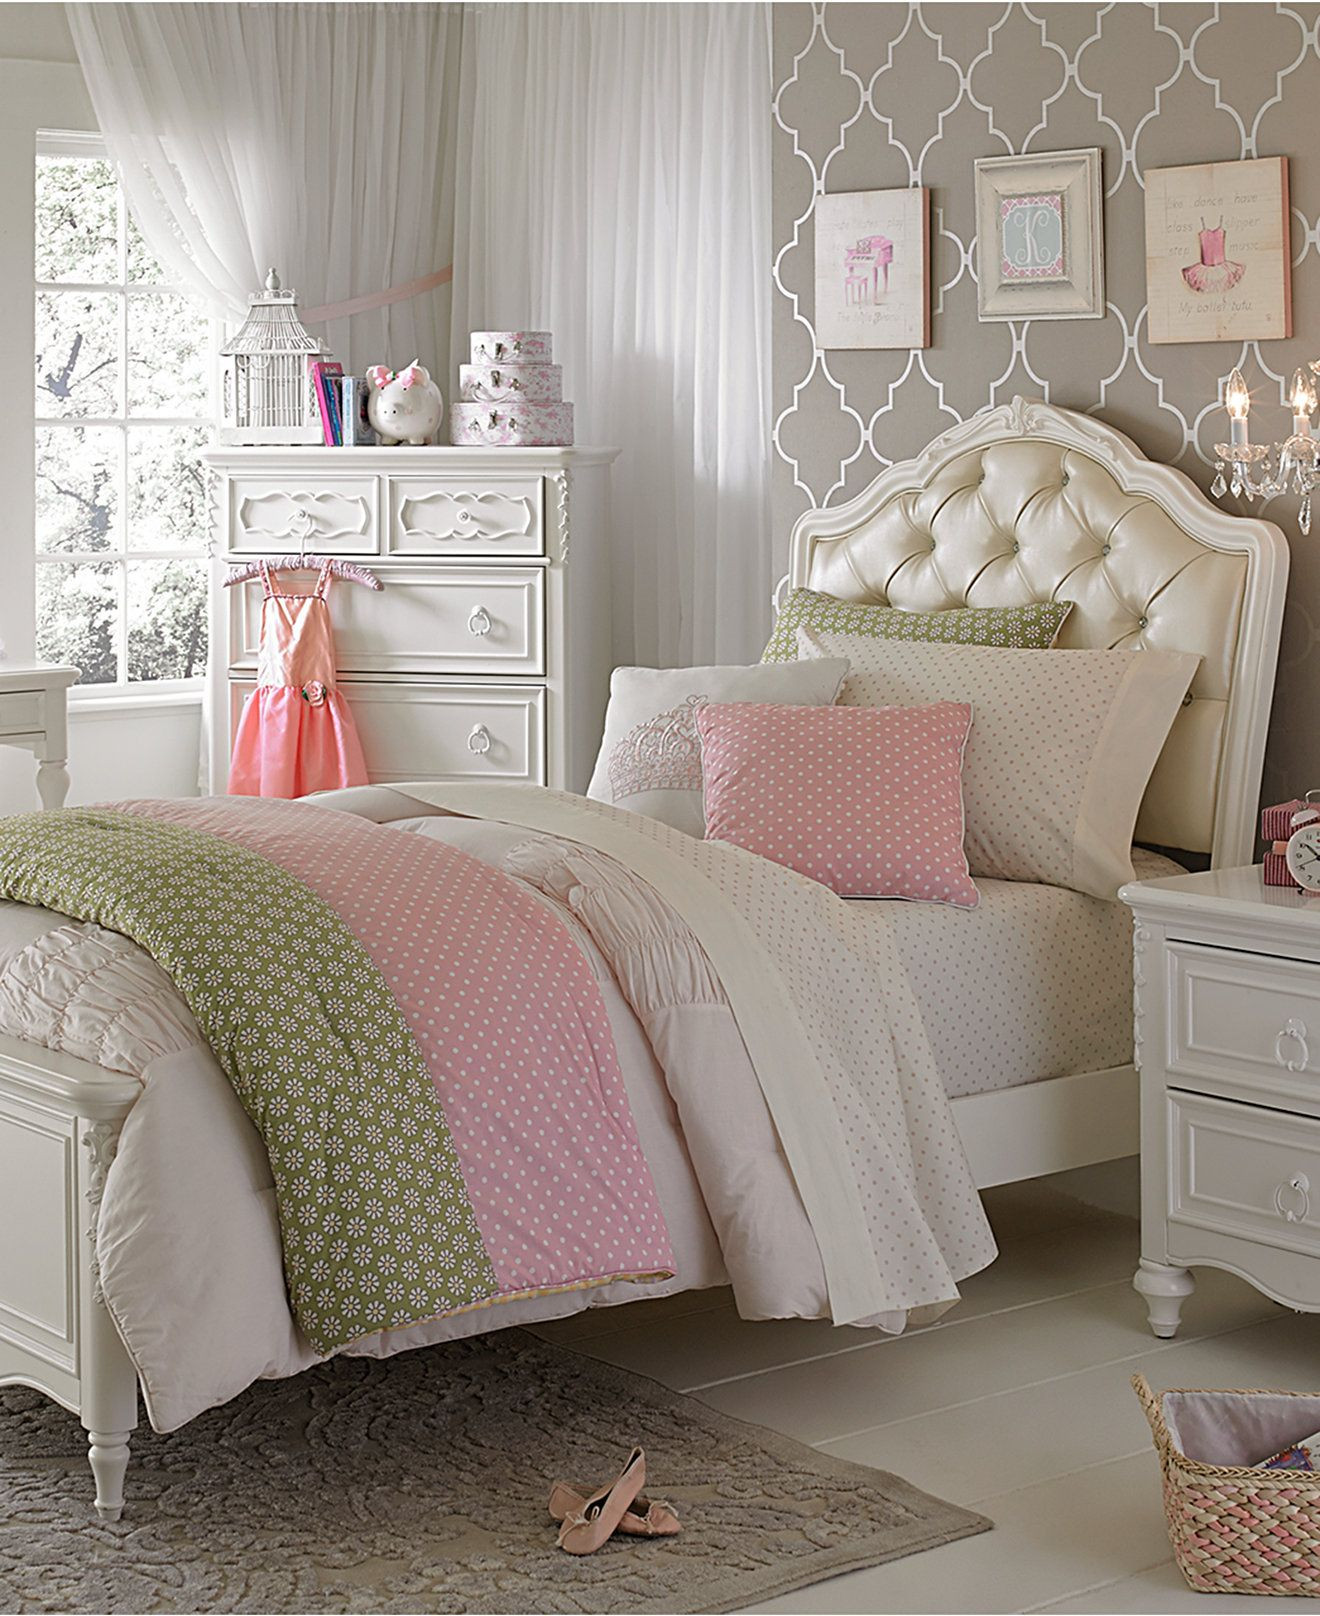 Discount Kids Bedroom Sets
 Love the pattern on the wall behind headboard Celestial